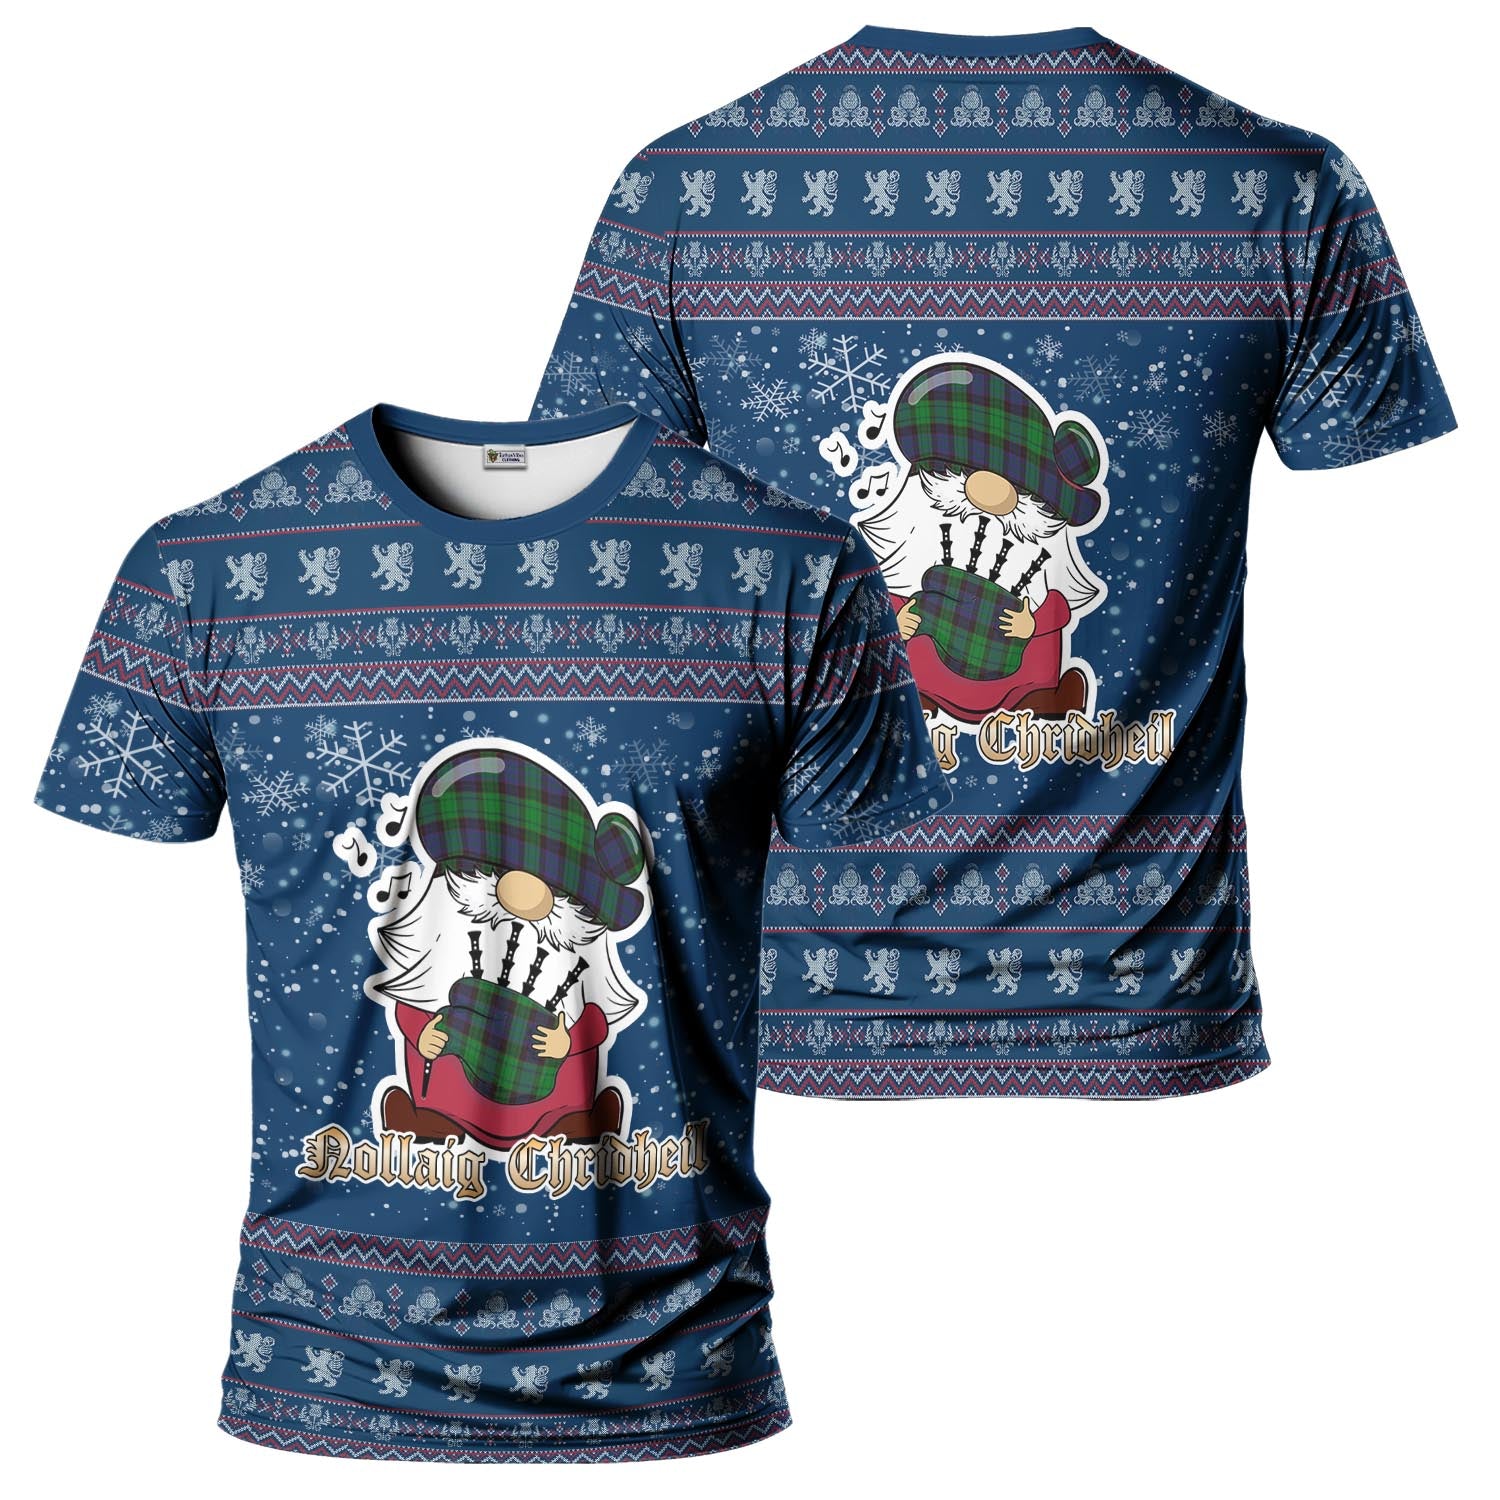 Stewart Old Modern Clan Christmas Family T-Shirt with Funny Gnome Playing Bagpipes Kid's Shirt Blue - Tartanvibesclothing